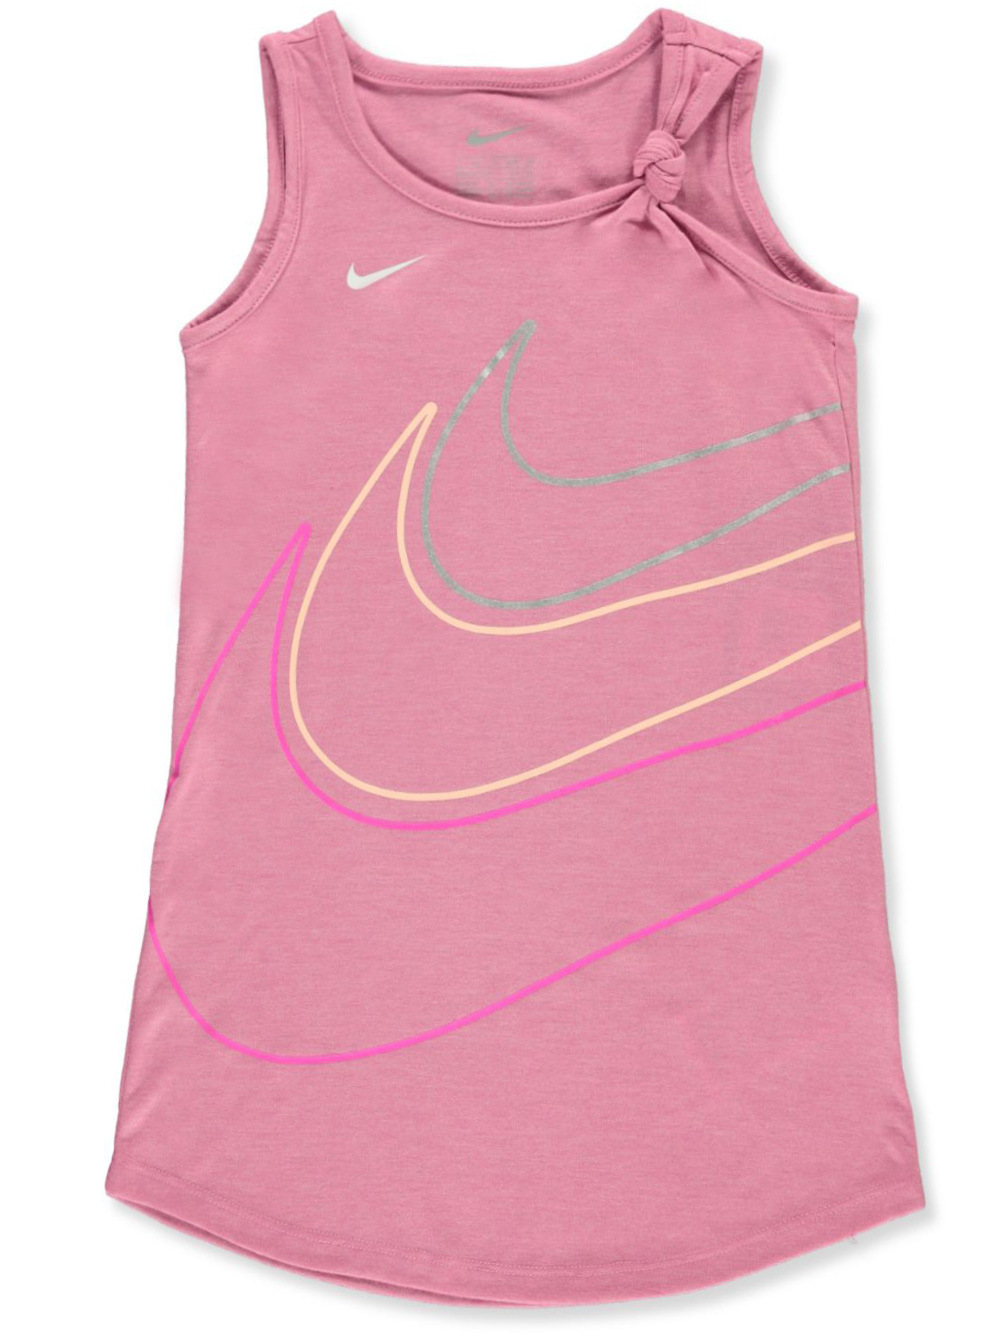 baby girl nike summer clothes